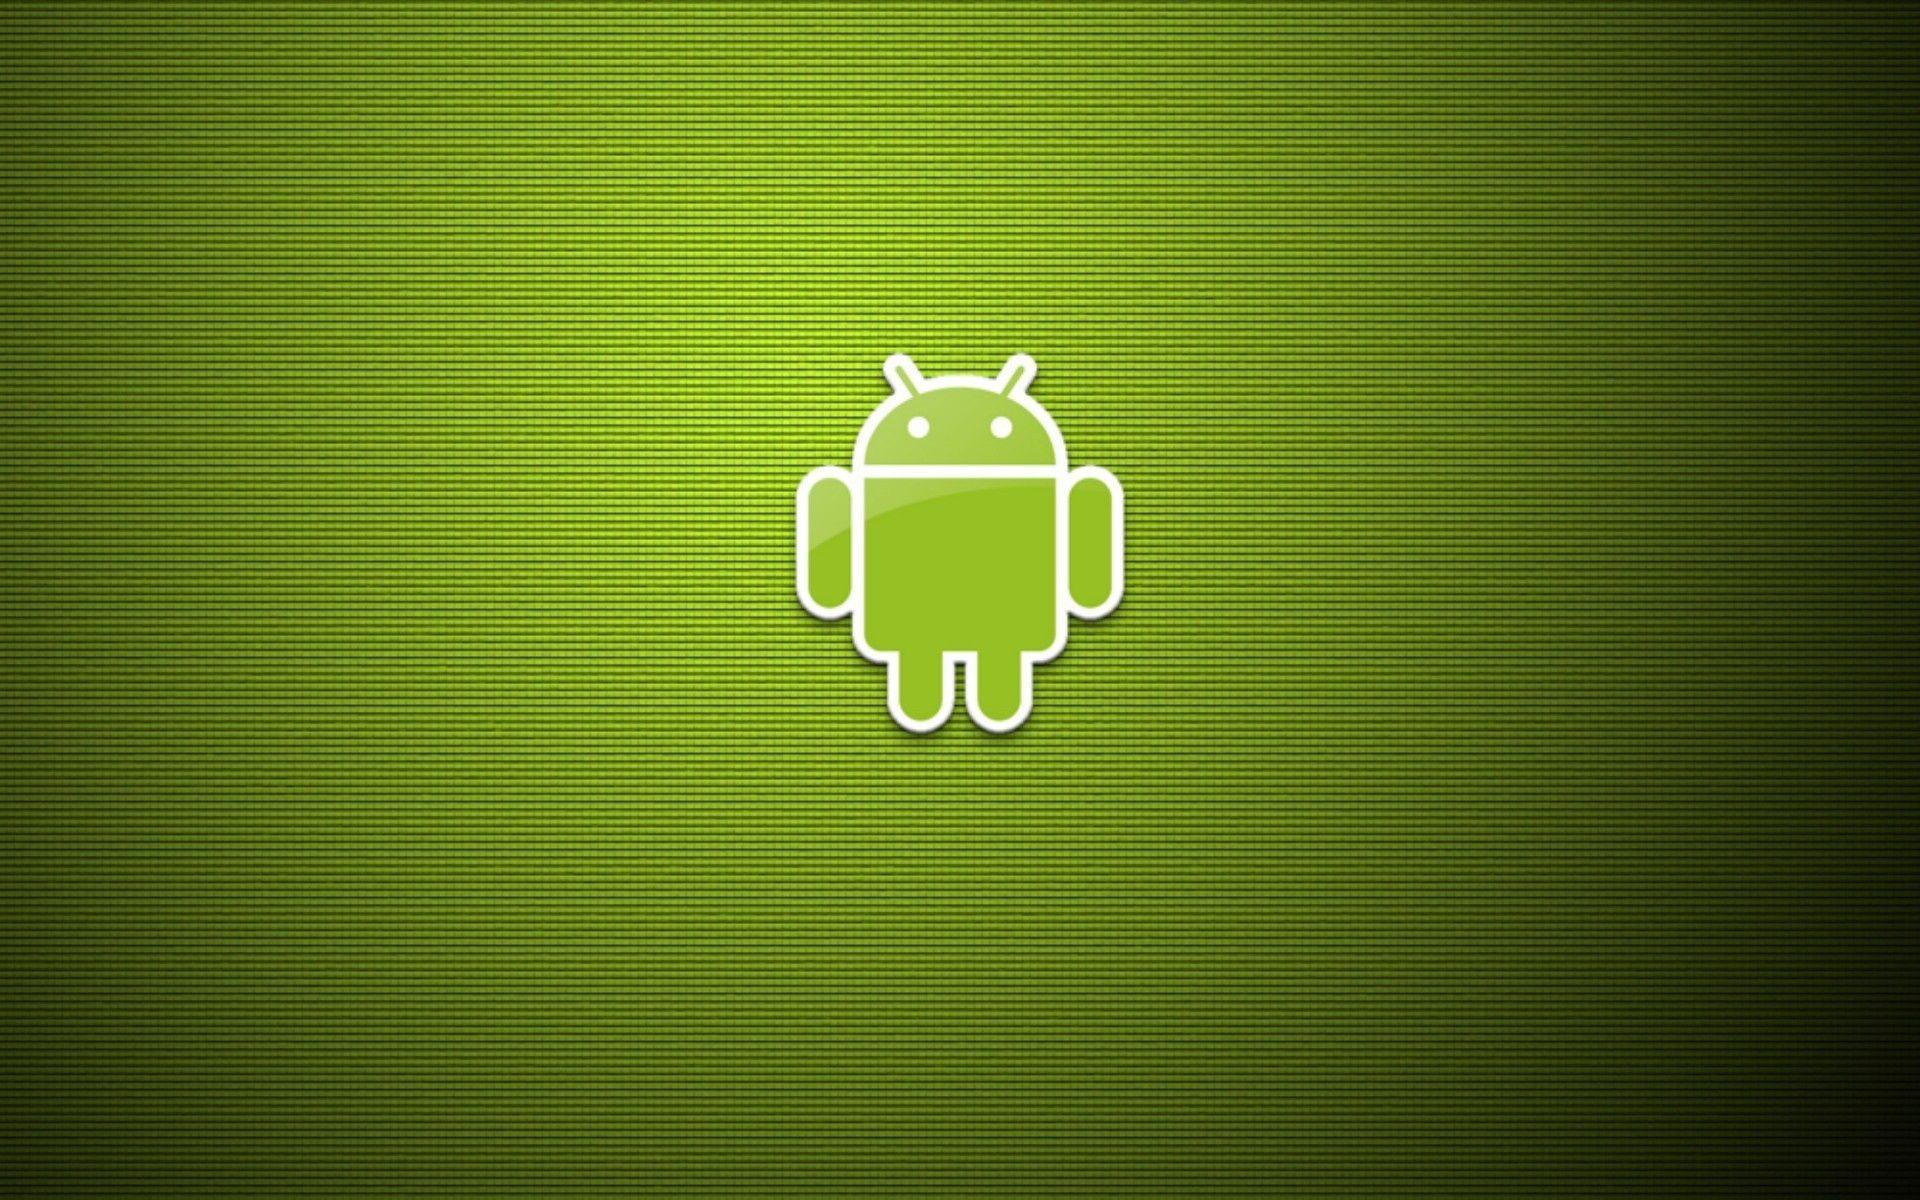 Download wallpapers Android green logo 4k green brickwall Android logo  brands Android neon logo Android for desktop free Pictures for desktop  free